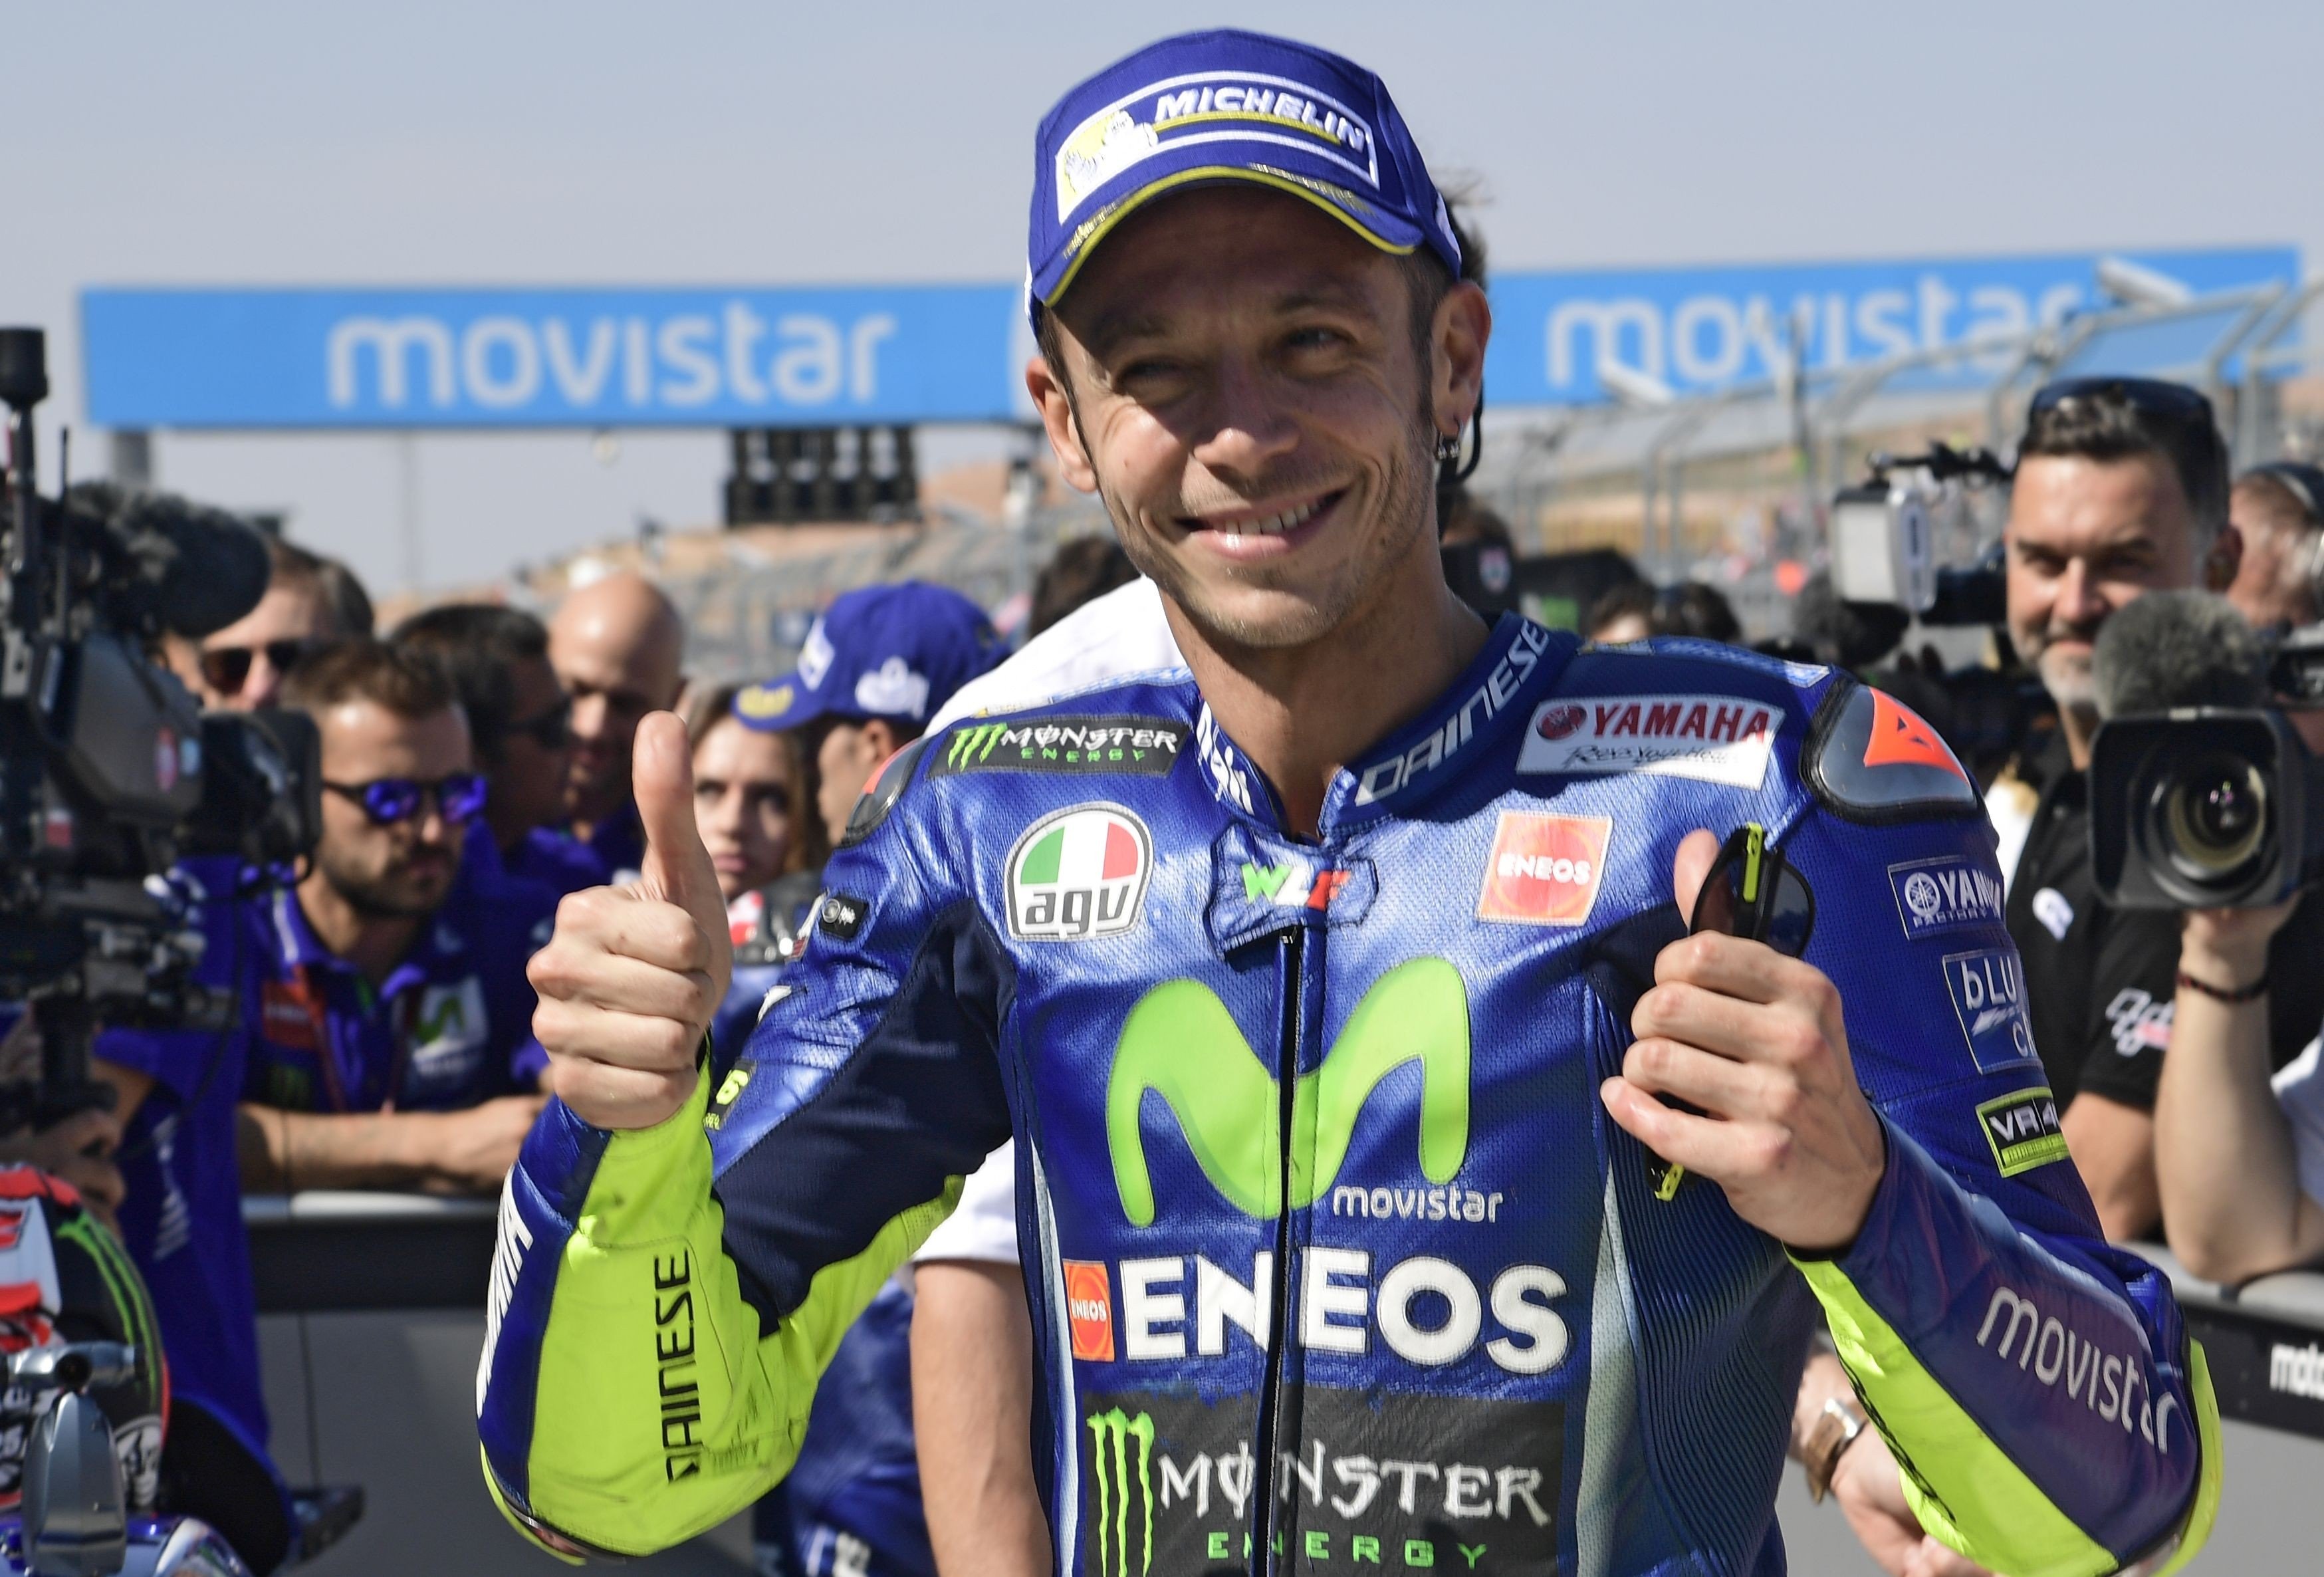 Legendary Italian former world champion manages to secure a spot on the front row in qualifying for the Aragon MotoGP three weeks after breaking leg